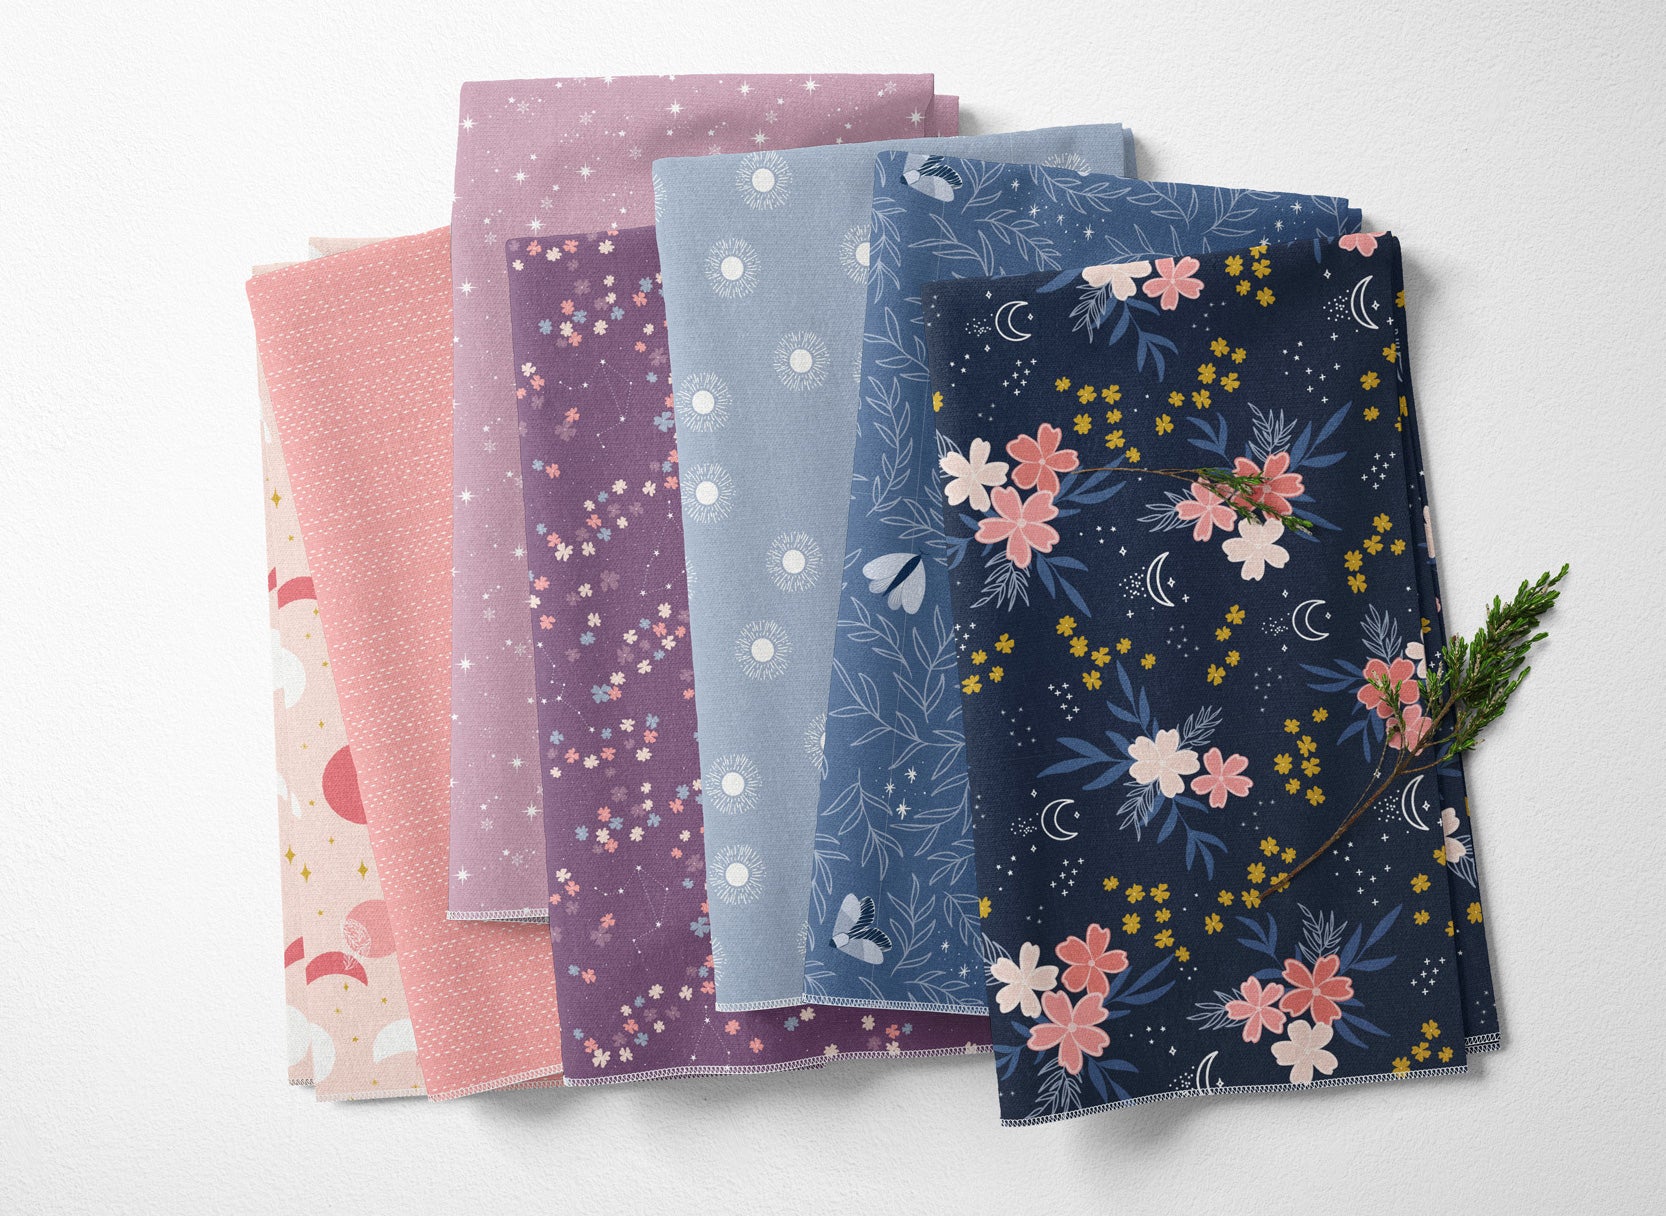 Moonchild fabric collection